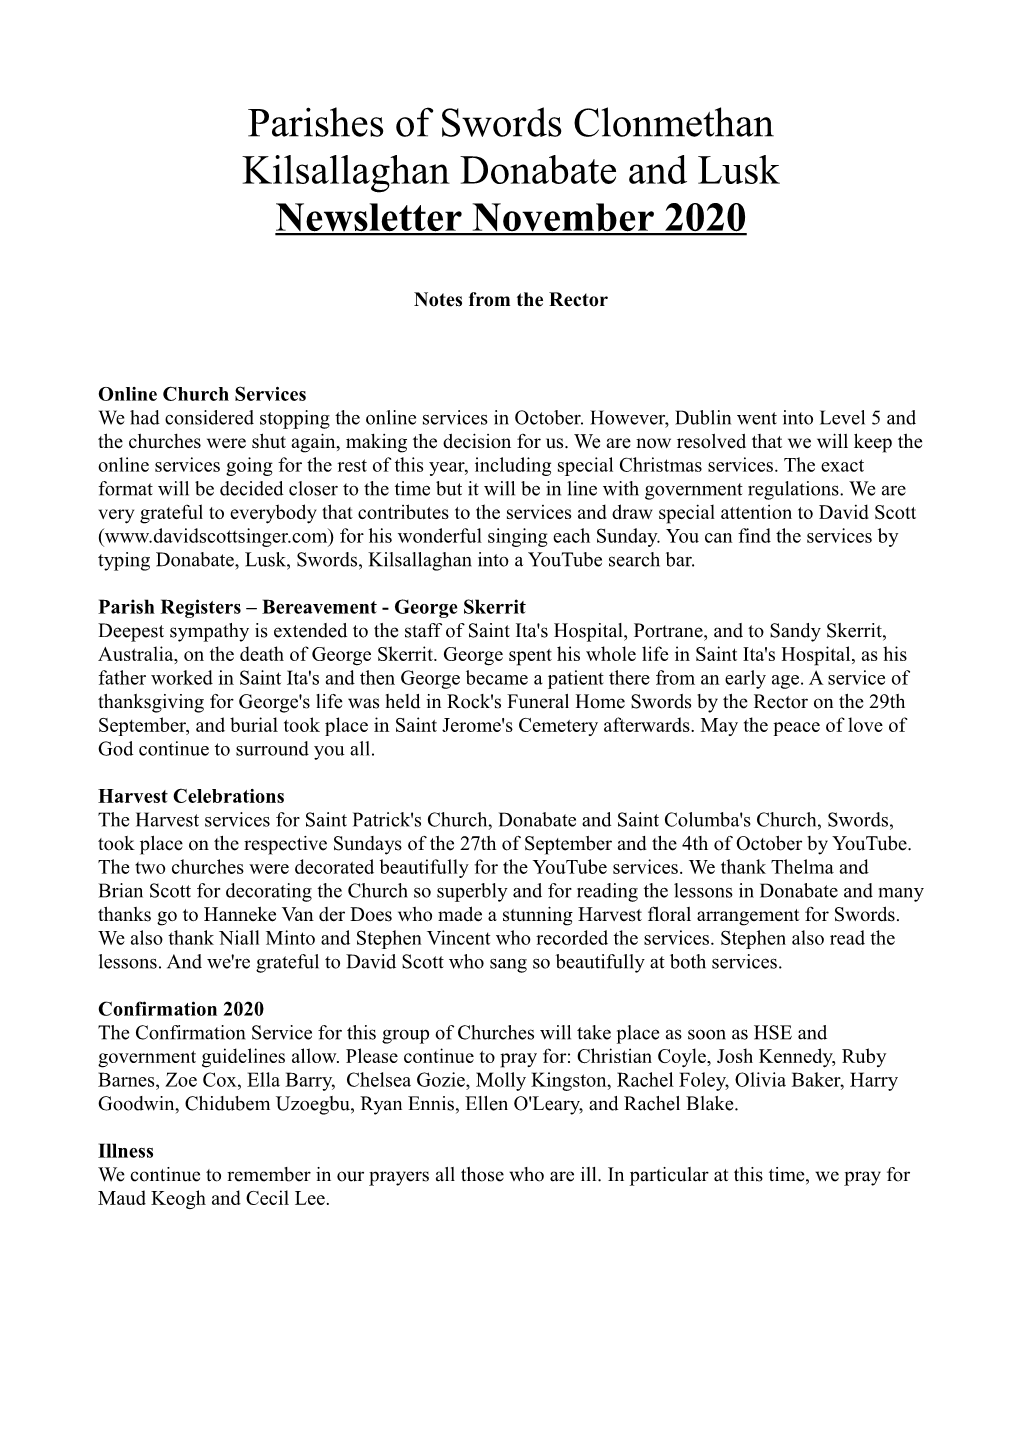 Parishes of Swords Clonmethan Kilsallaghan Donabate and Lusk Newsletter November 2020